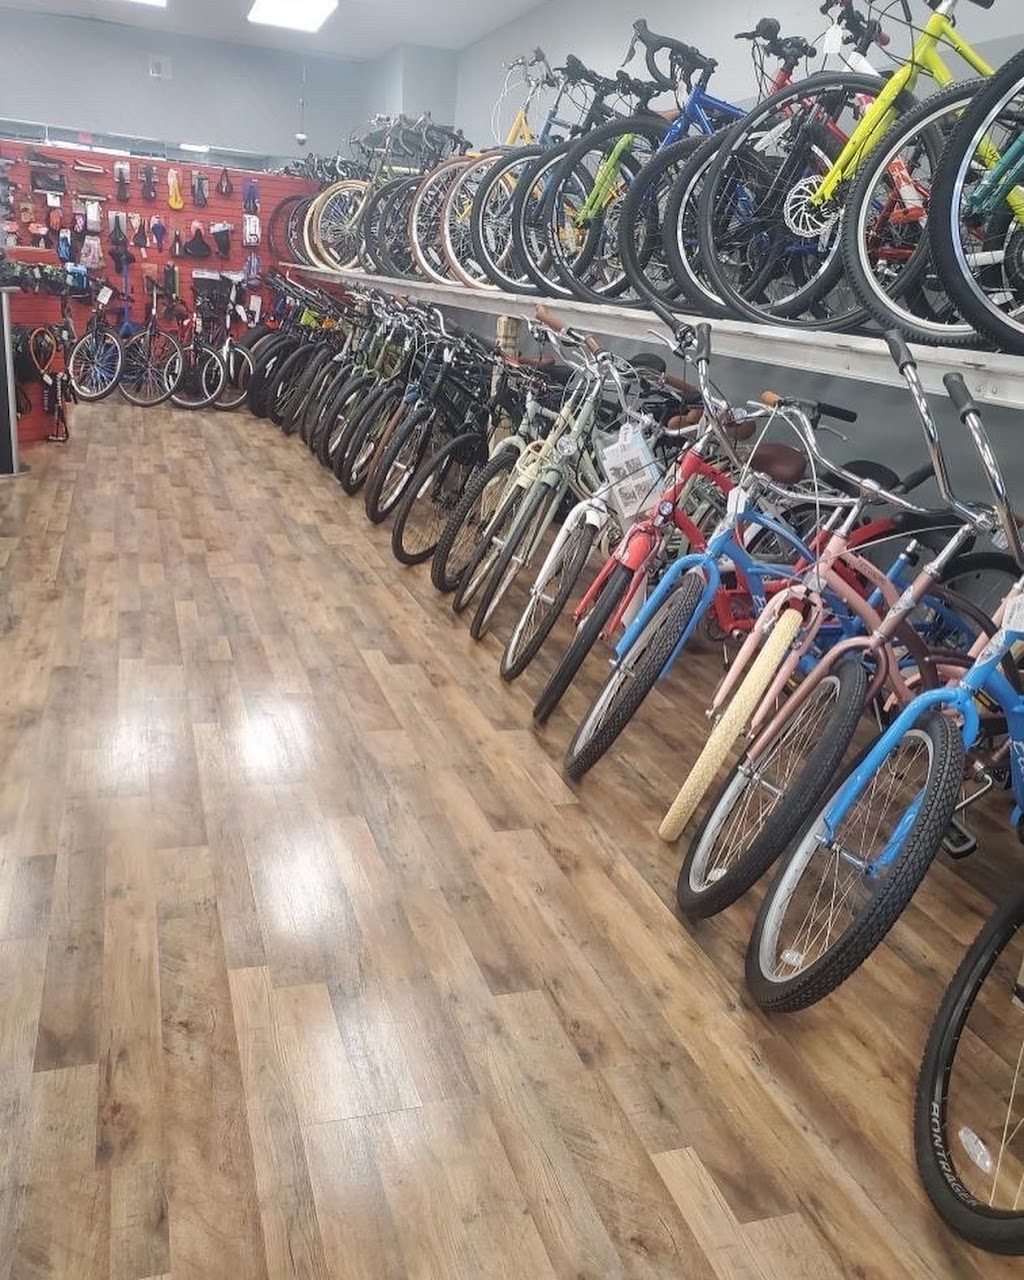 South Shore Bicycle and Fitness | 1311 Broadway, Hewlett, NY 11557 | Phone: (516) 374-0606